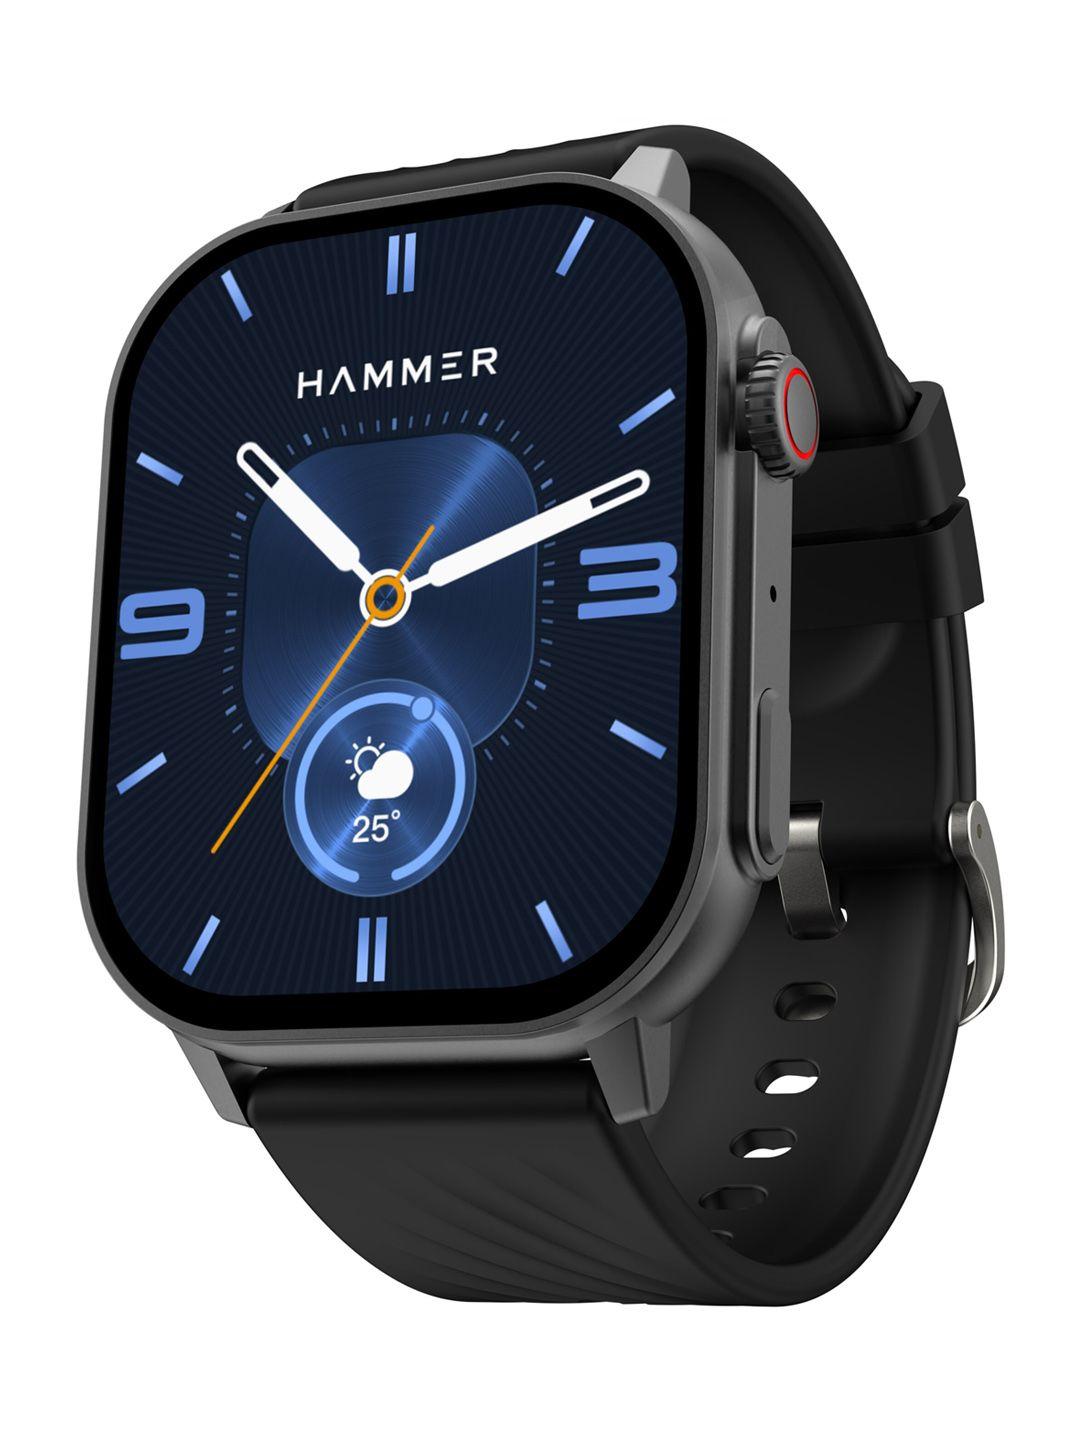 hammer-power-black-arctic-2.04-inch-super-amoled-smart-watch-with-bt-calling